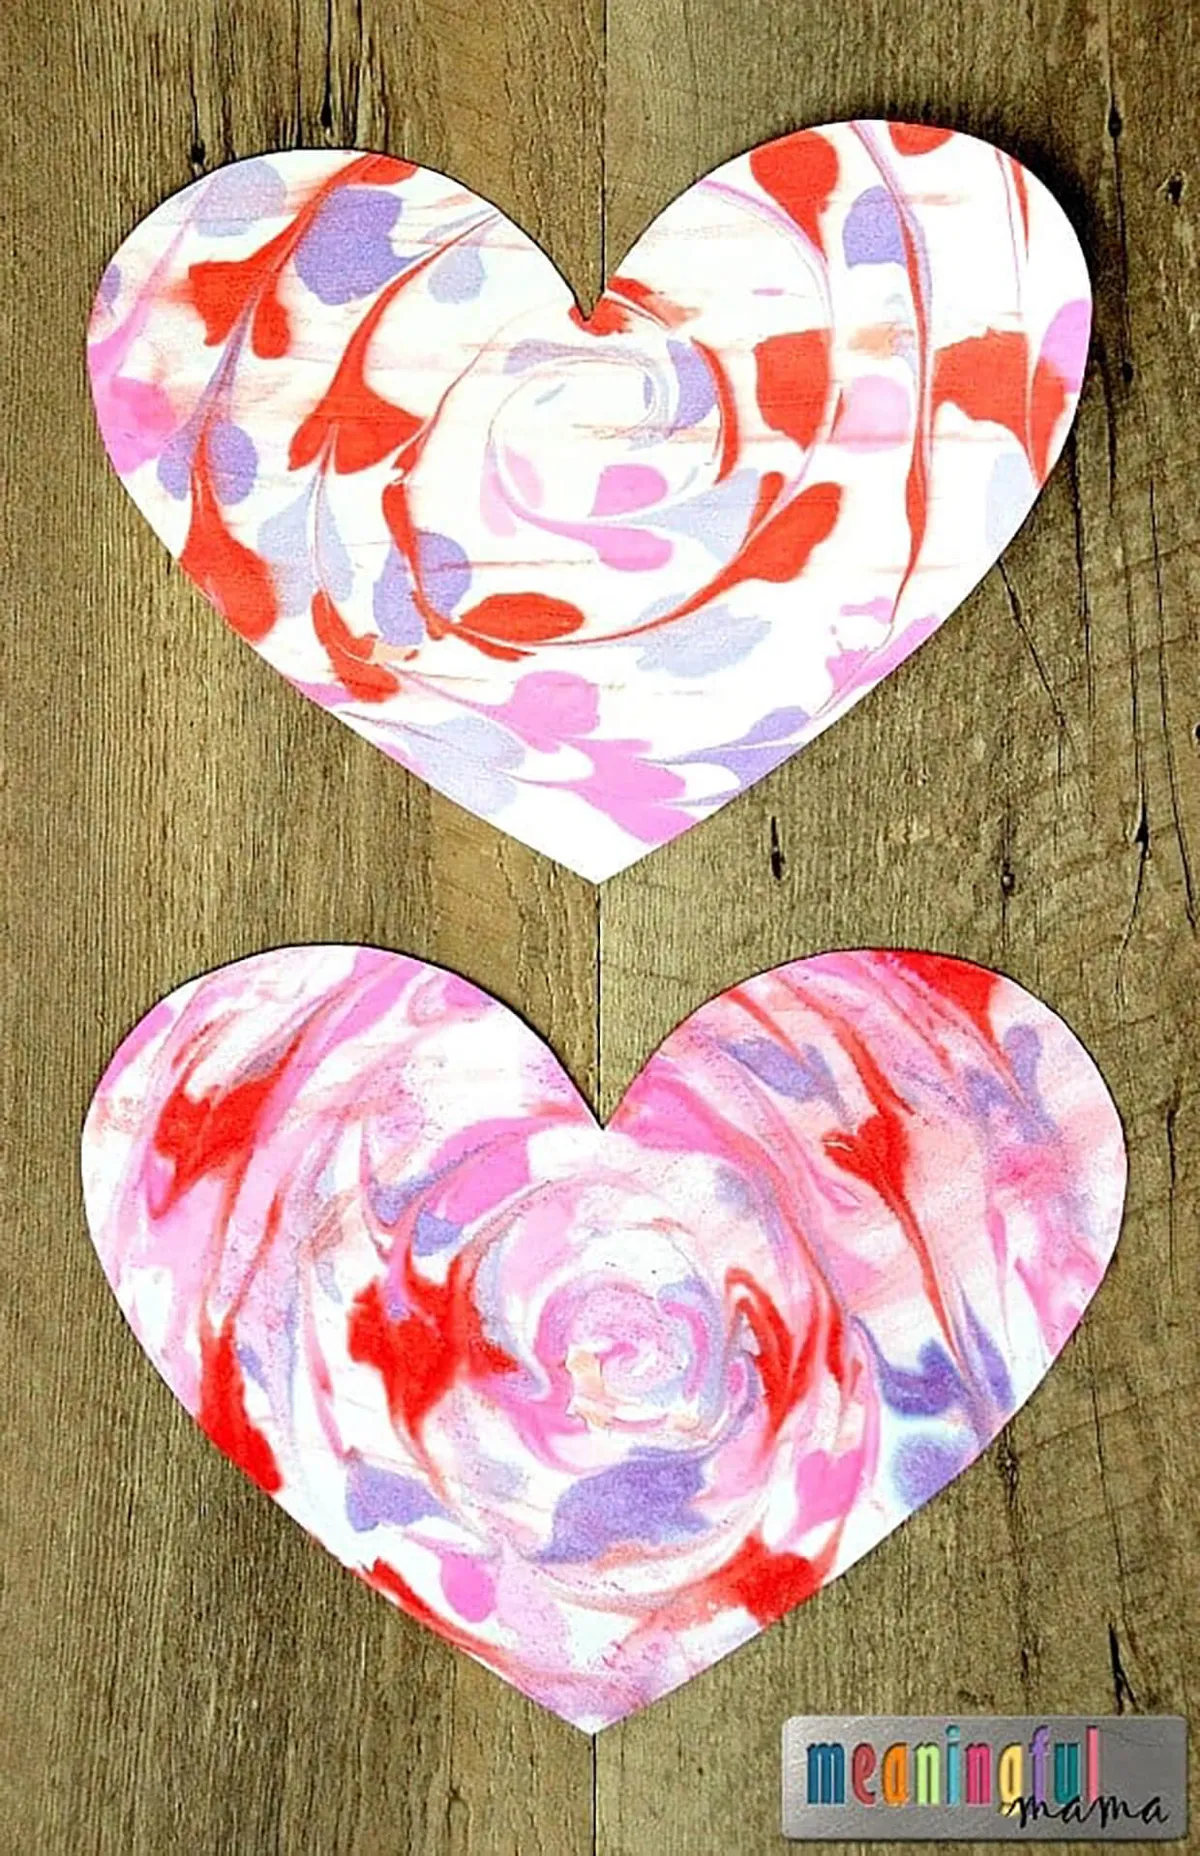 Paper heart swirled with red and pink paint - valentines crafts for kids